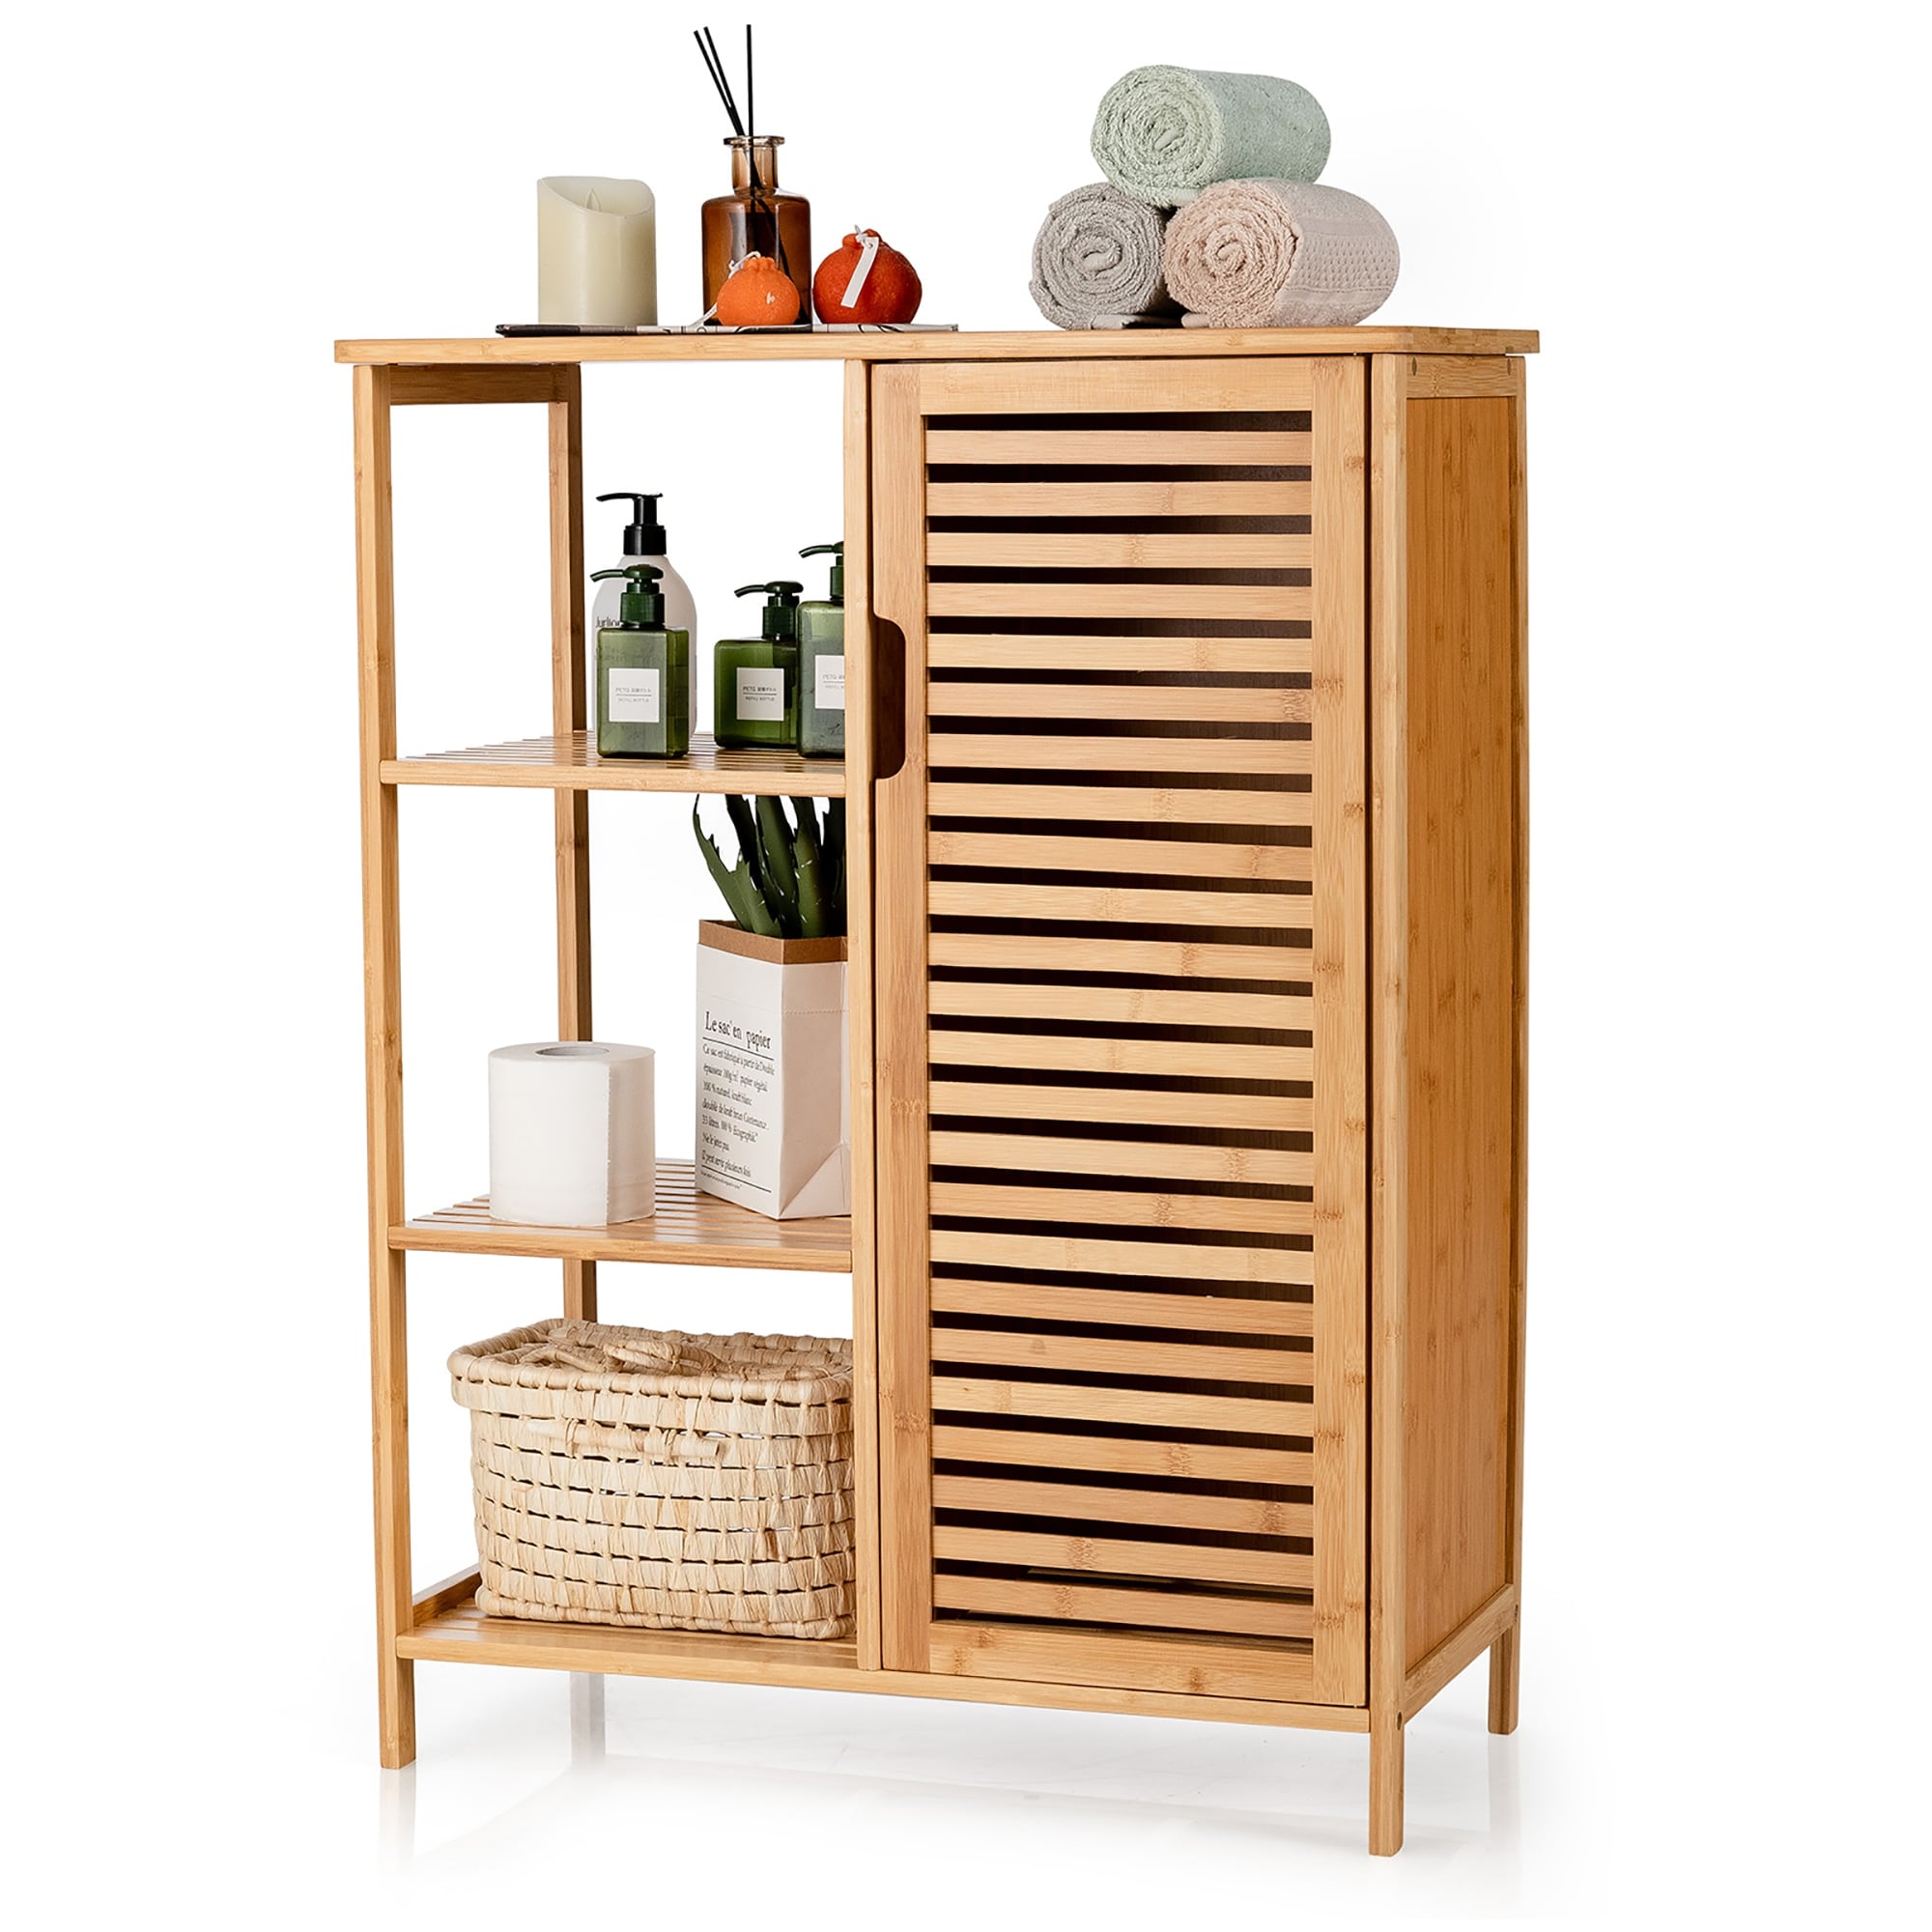 https://ak1.ostkcdn.com/images/products/is/images/direct/bb4bfbc68a44e0ff10766dfc82d32fb66a52ffa8/Costway-Bathroom-Cabinet-Bamboo-Storage-Floor-Cabinet-w--Single-Door-%26.jpg